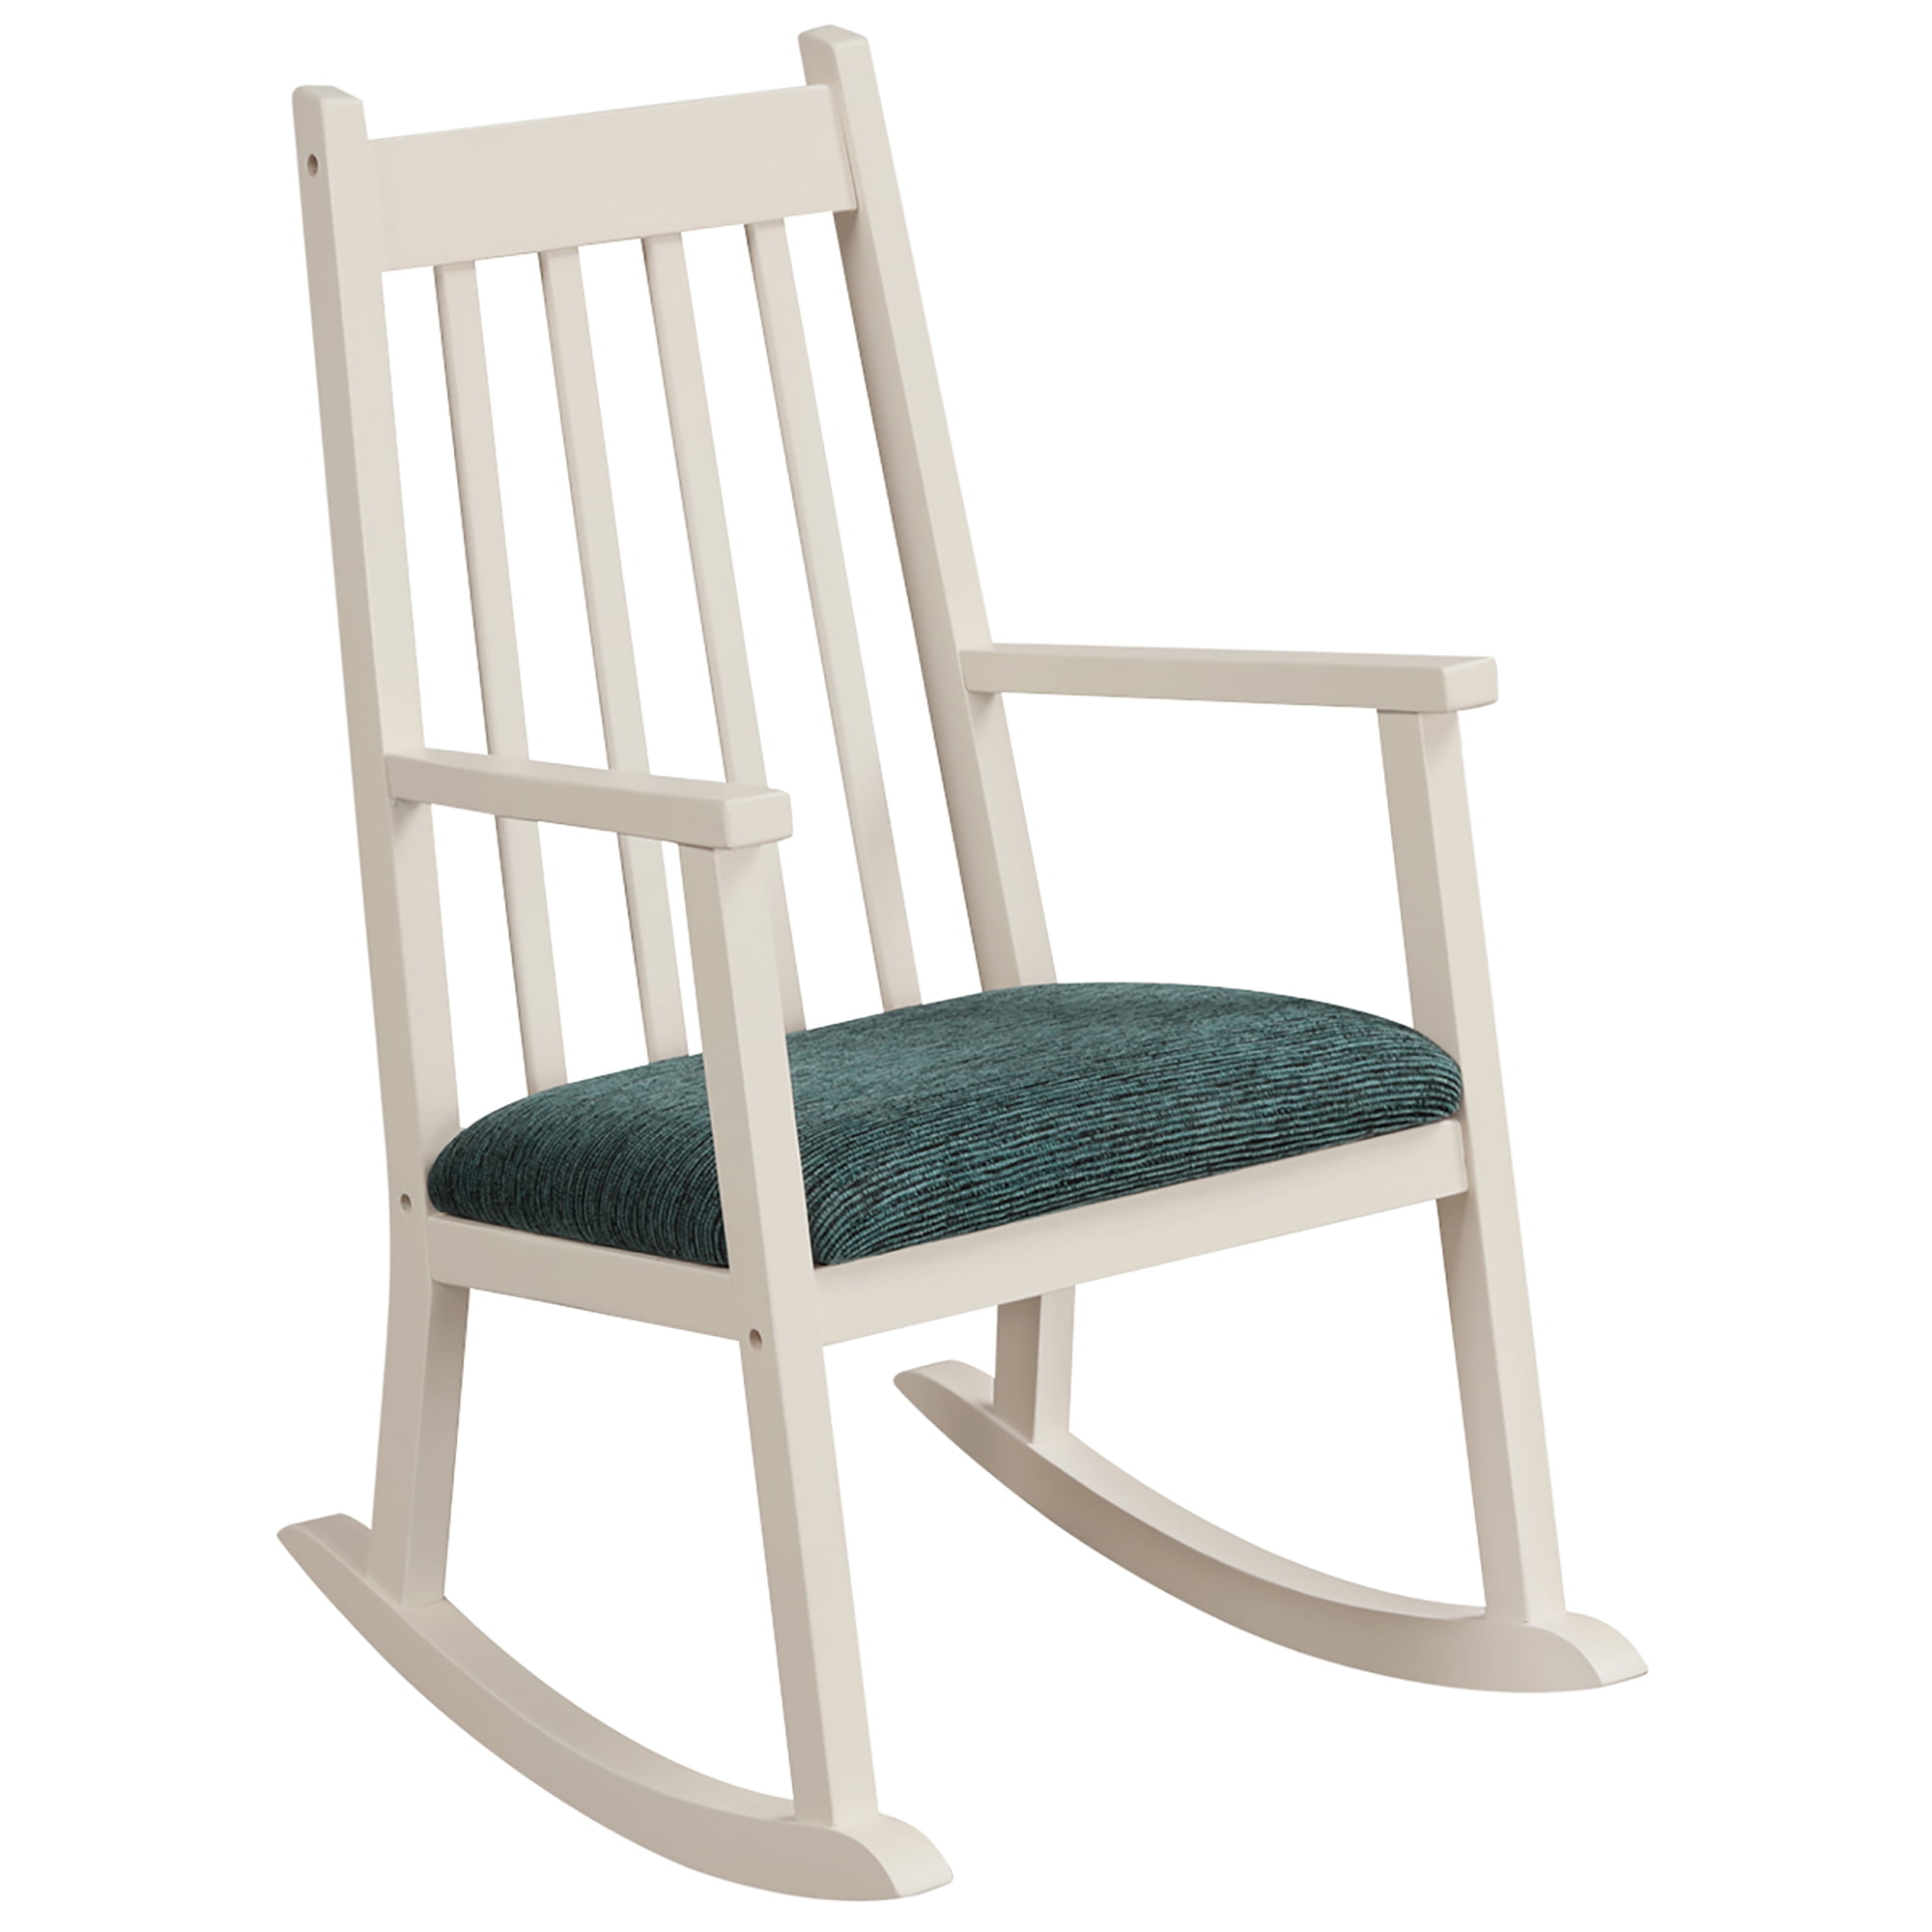 Featured image of post Padded Kids Rocking Chair / Shop for traditional kids rocking chairs at kidkraft.com.